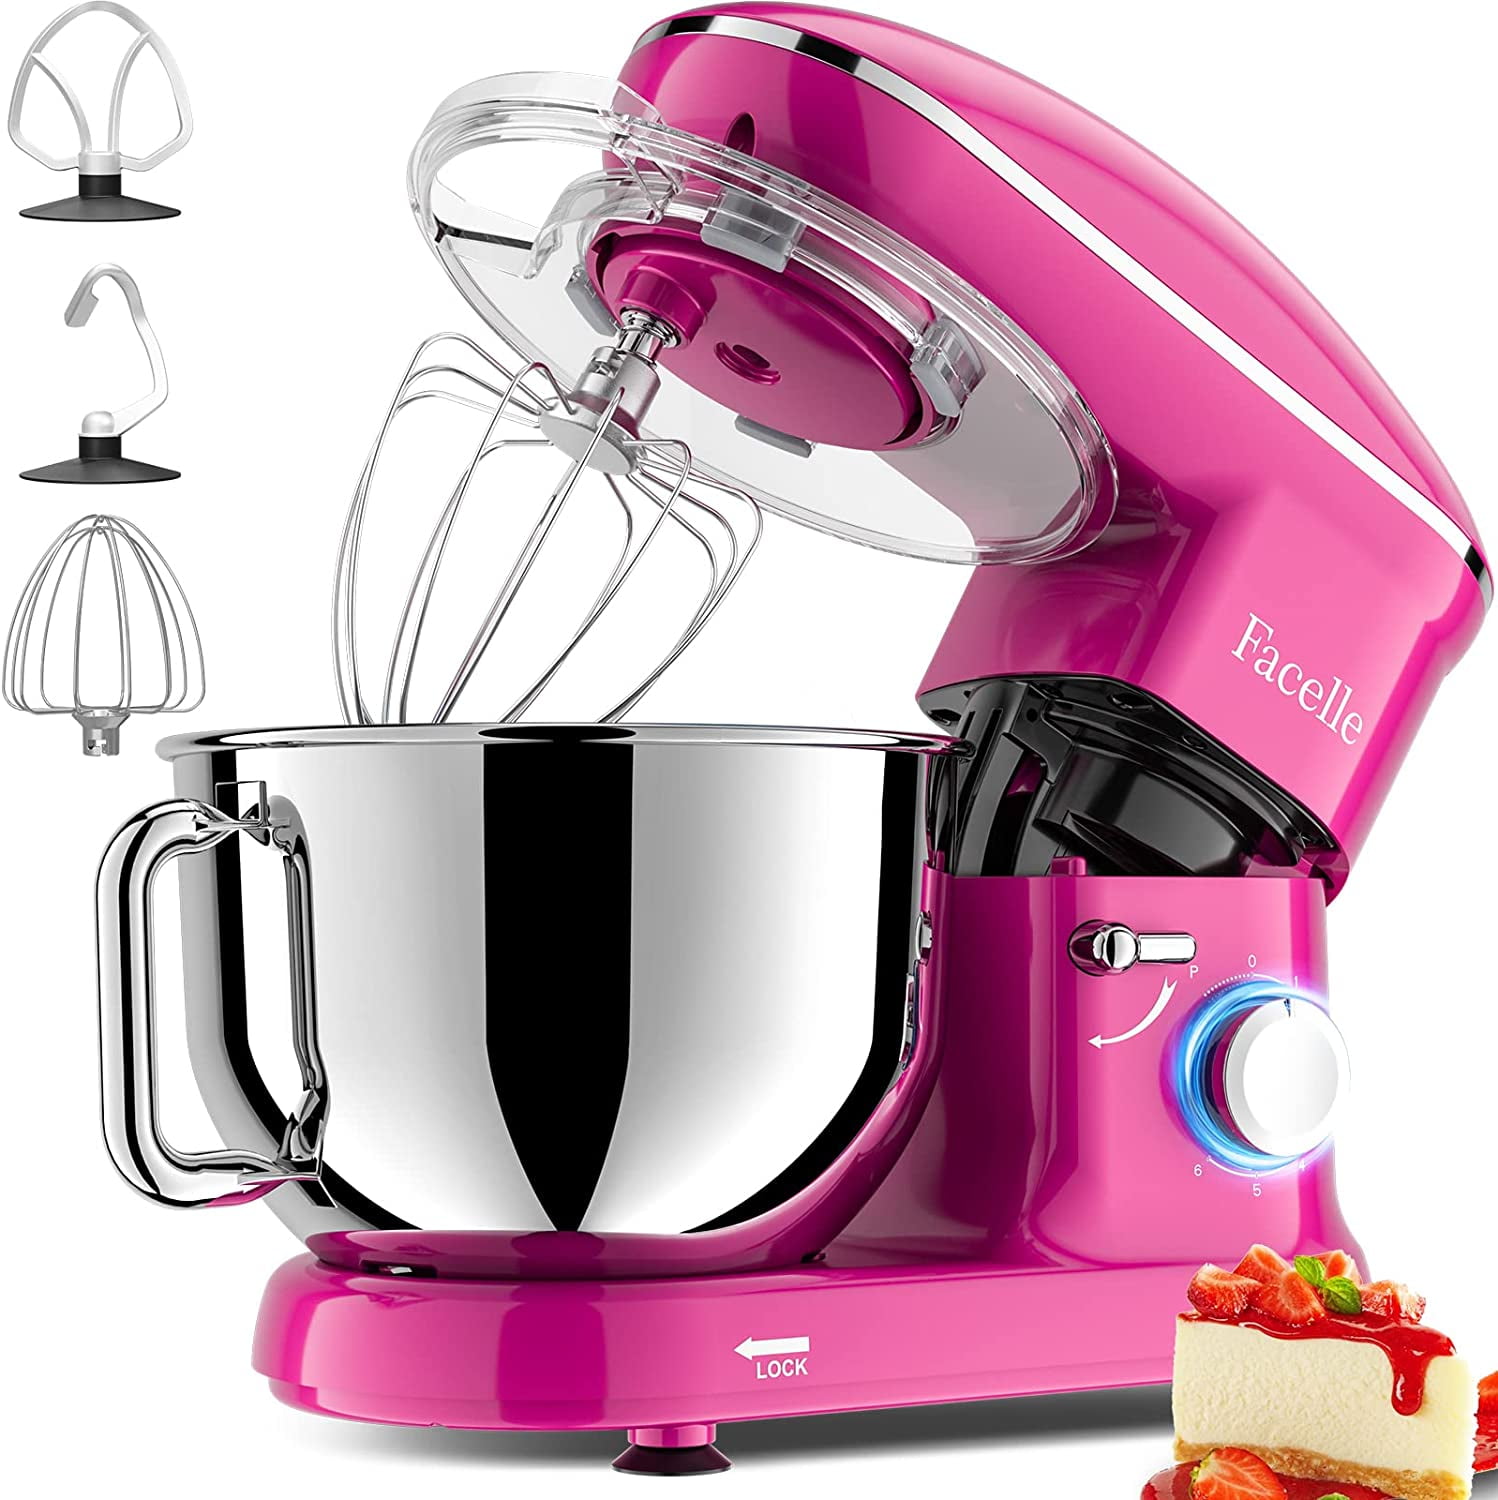 Should You Buy? Cheflee 6 Quart Household Stand Mixer 